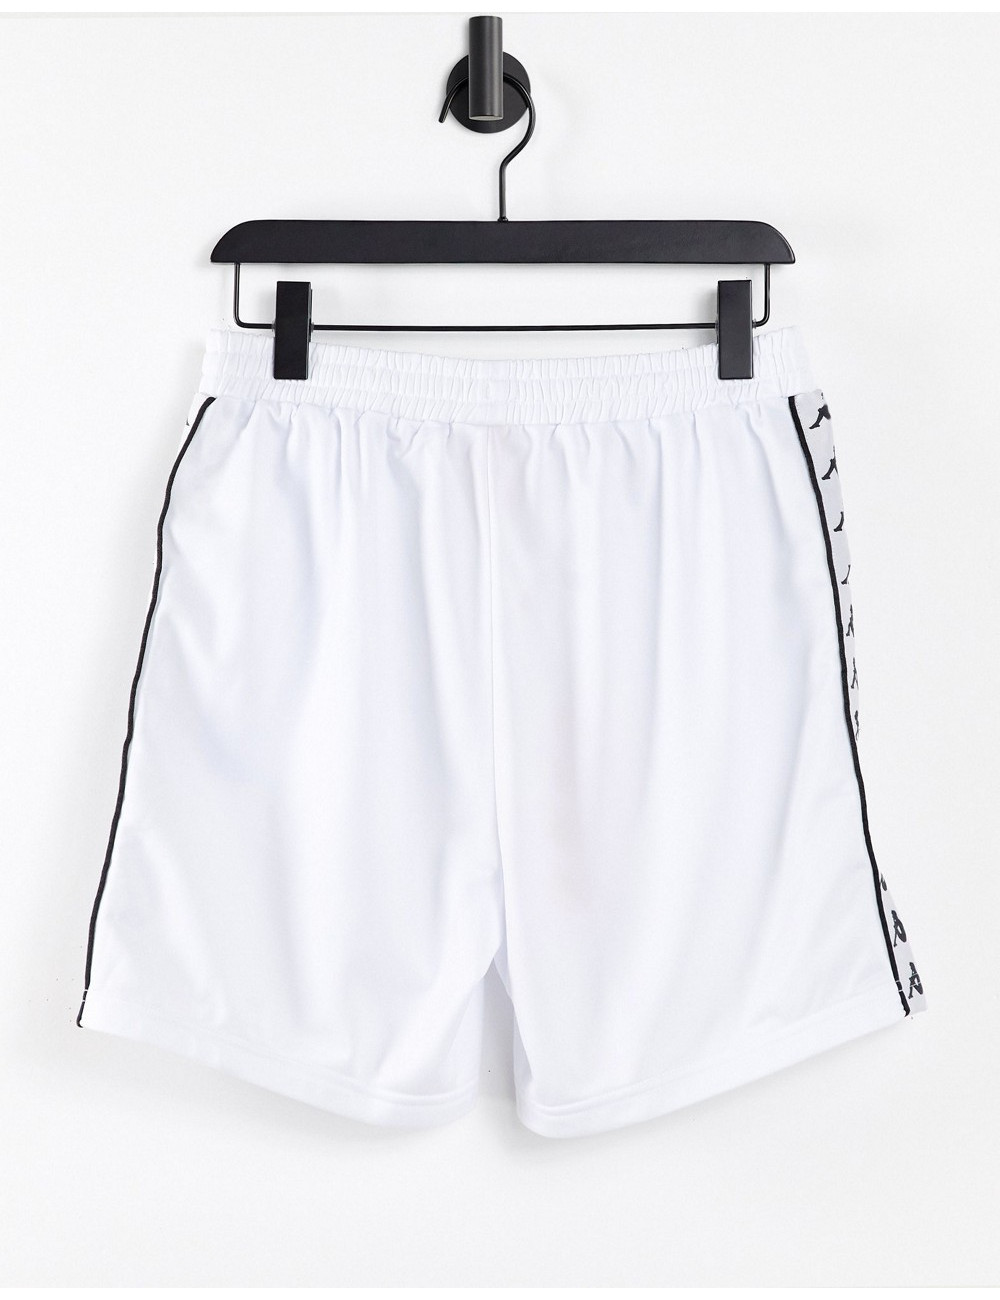 Kappa shorts with logo in...